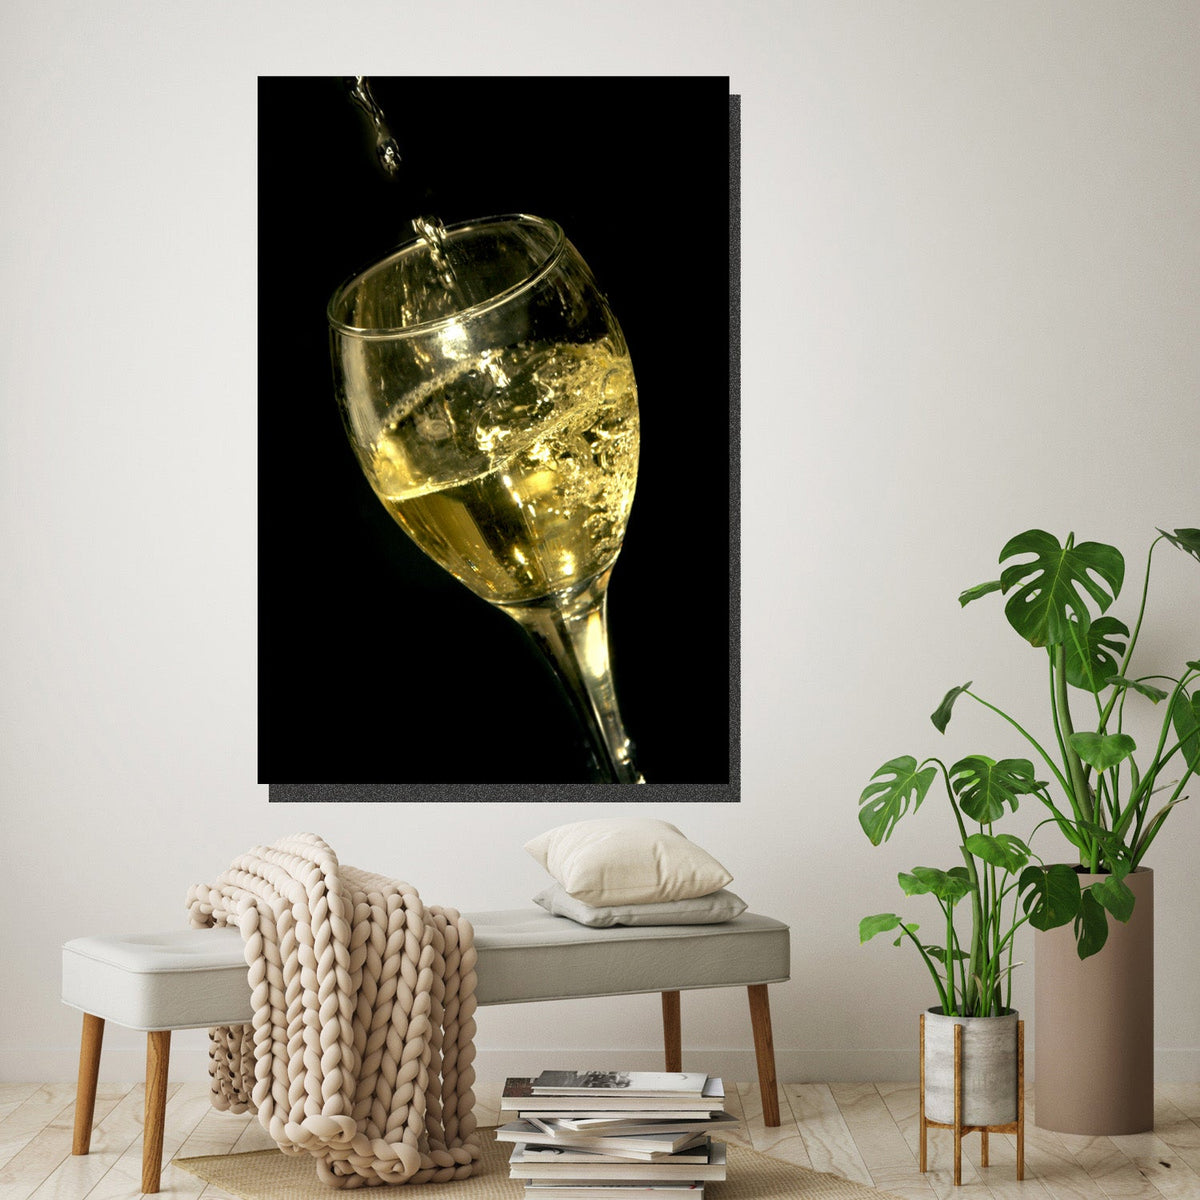 https://cdn.shopify.com/s/files/1/0387/9986/8044/products/GlassofChampagneCanvasArtprintStretched-2.jpg